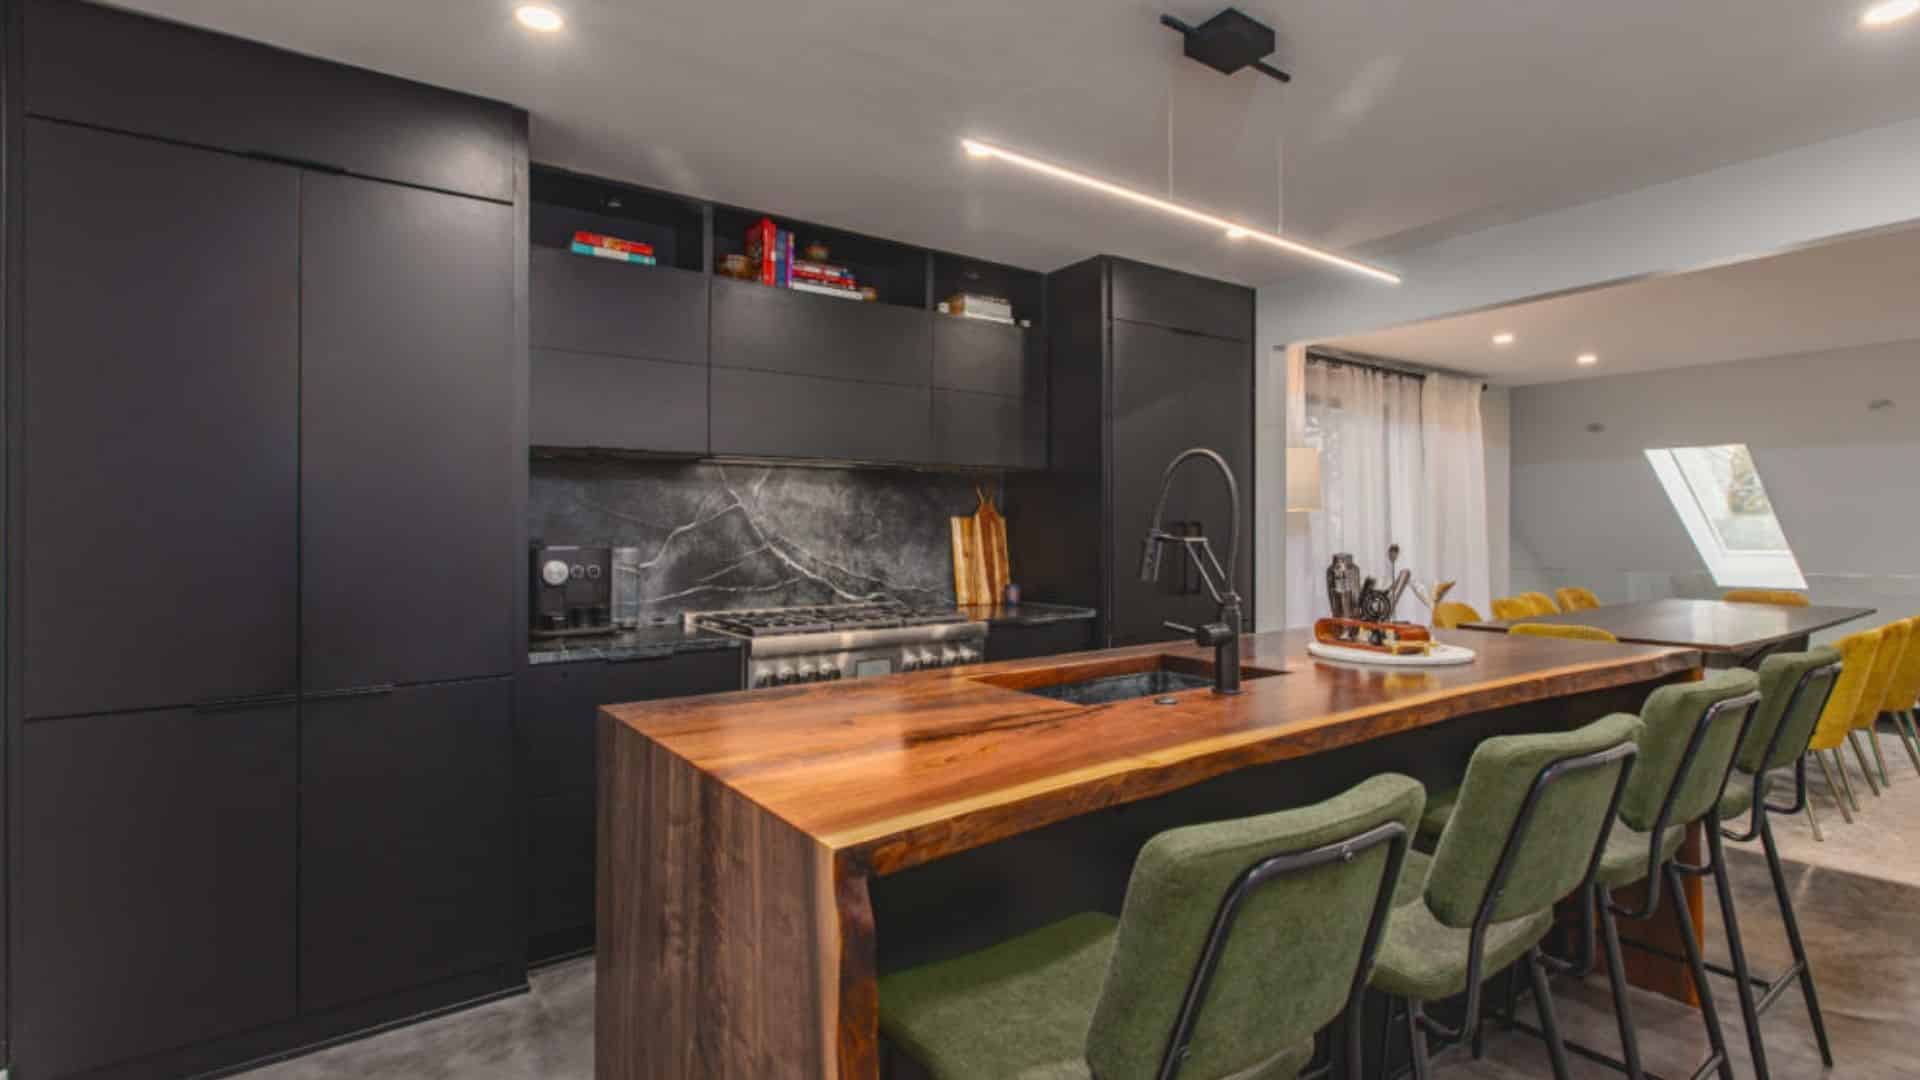 https://www.usacabinetstore.com/wp-content/uploads/2021/11/Black-Cabinets-With-Wood-Countertops.jpg